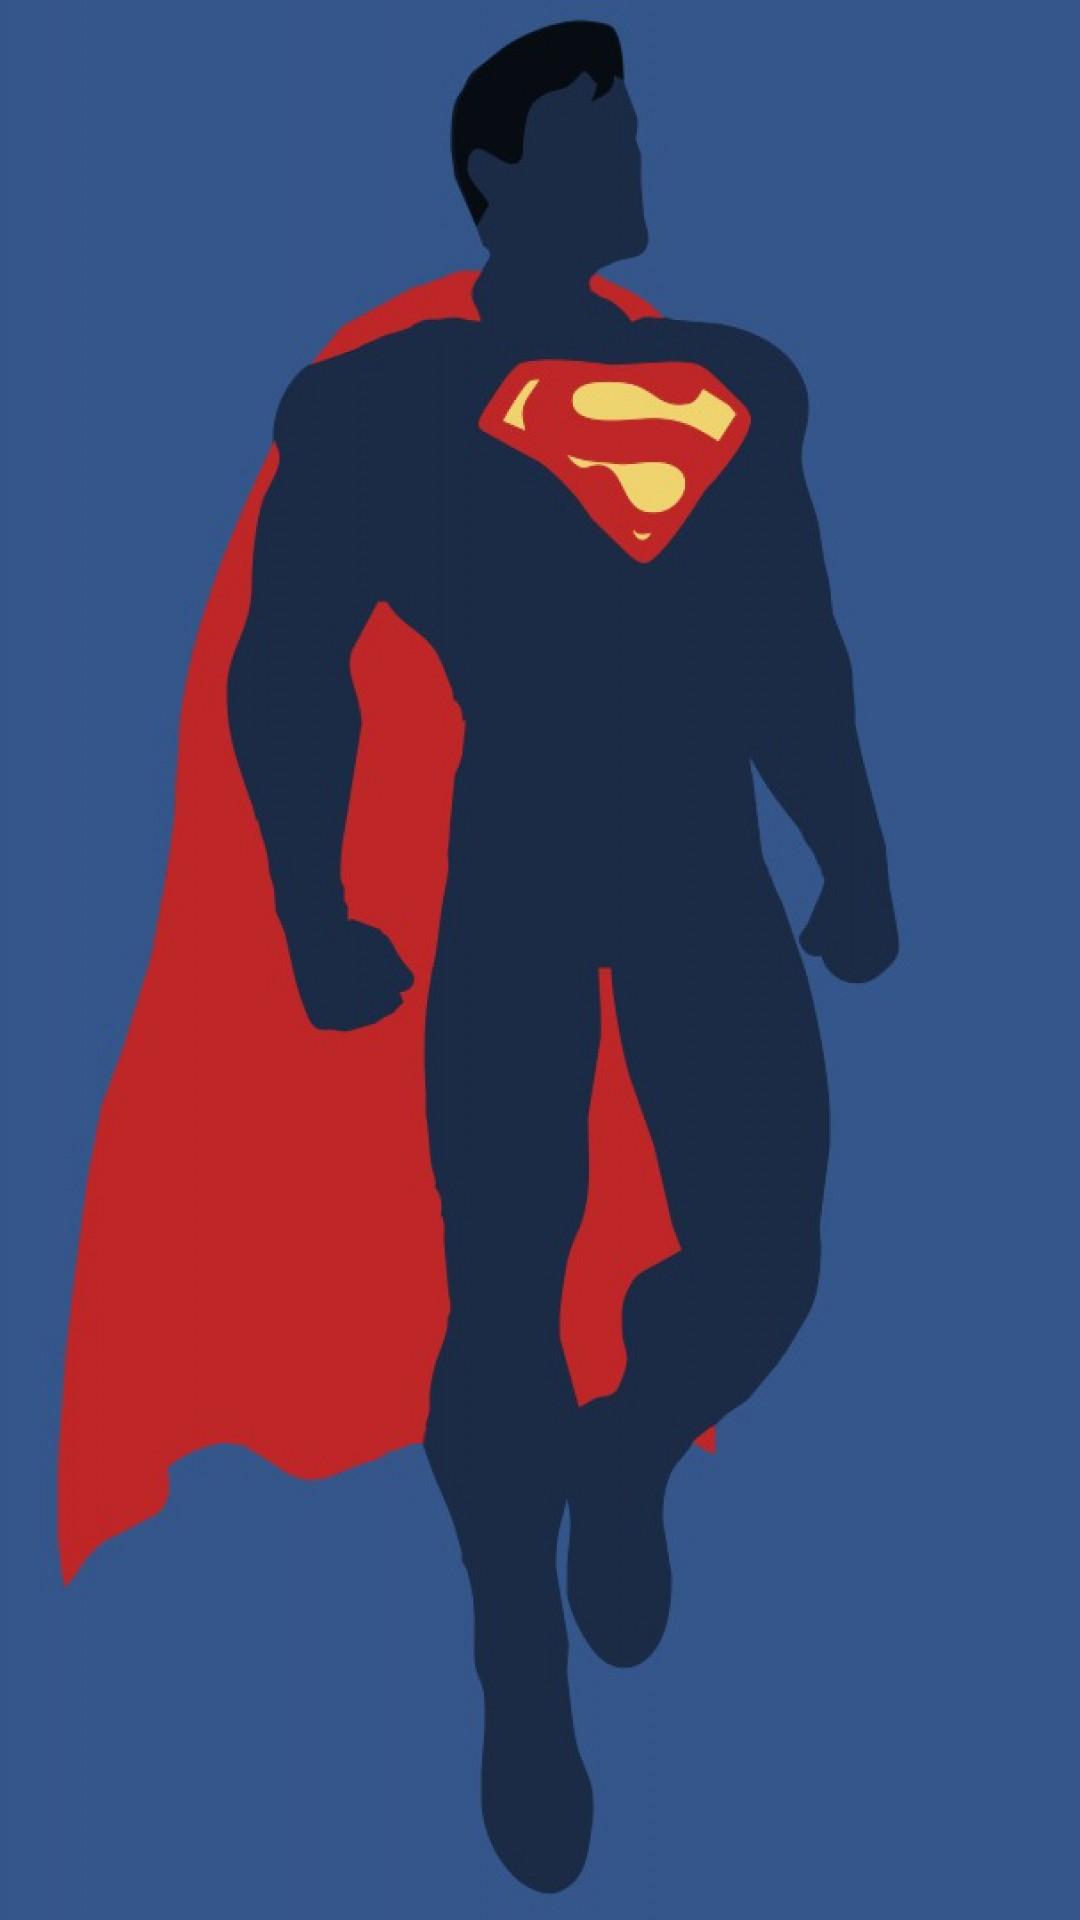 Full HD 1080p Superman Android Wallpaper Gallery Free